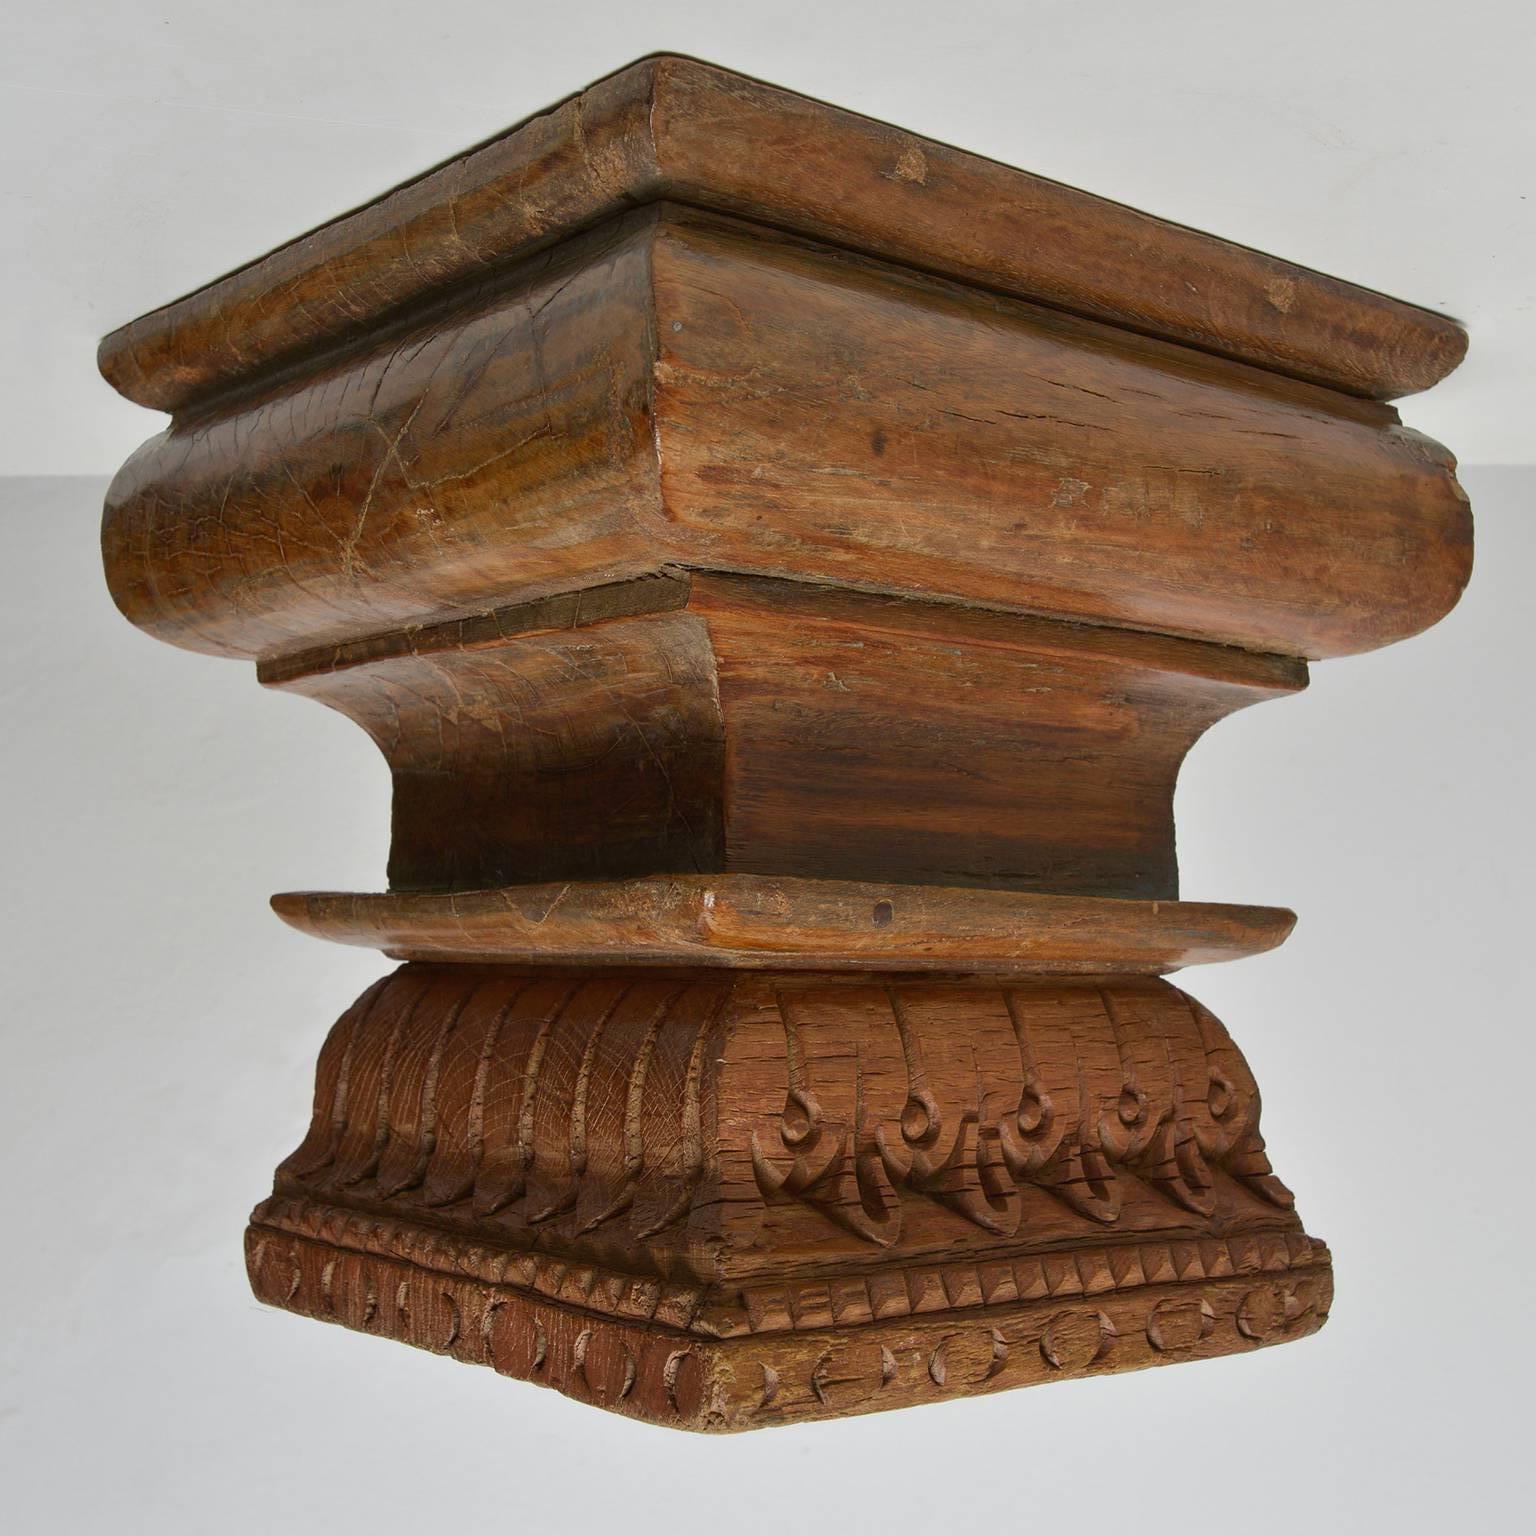 Indian Side Table or Stool, Old Asian Teak Sculpture Capitals